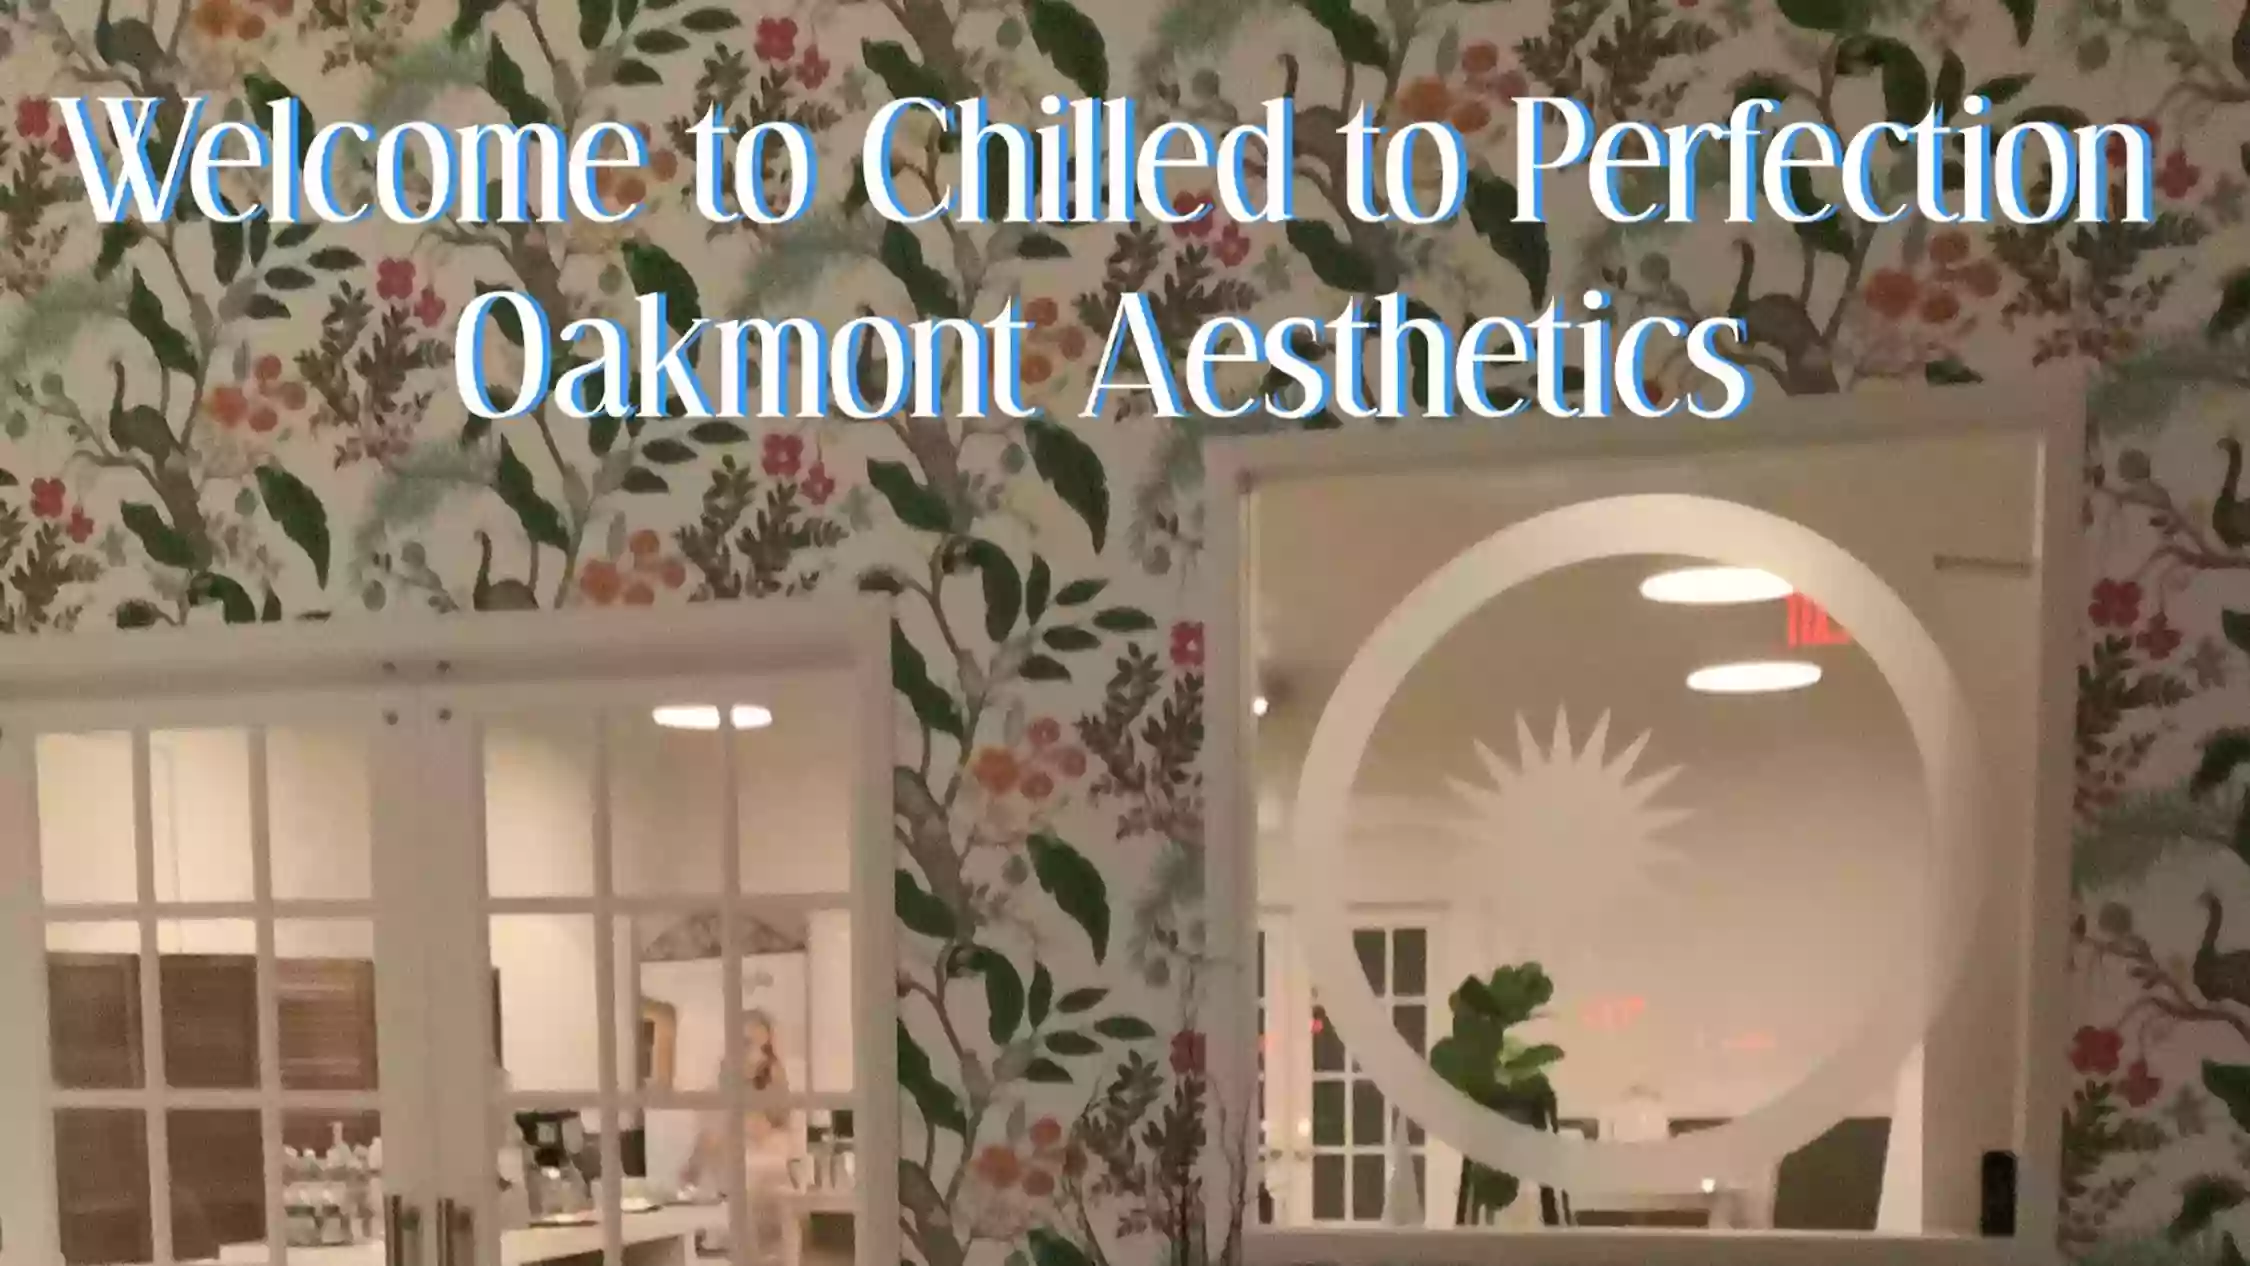 Chilled to Perfection Oakmont Aesthetics